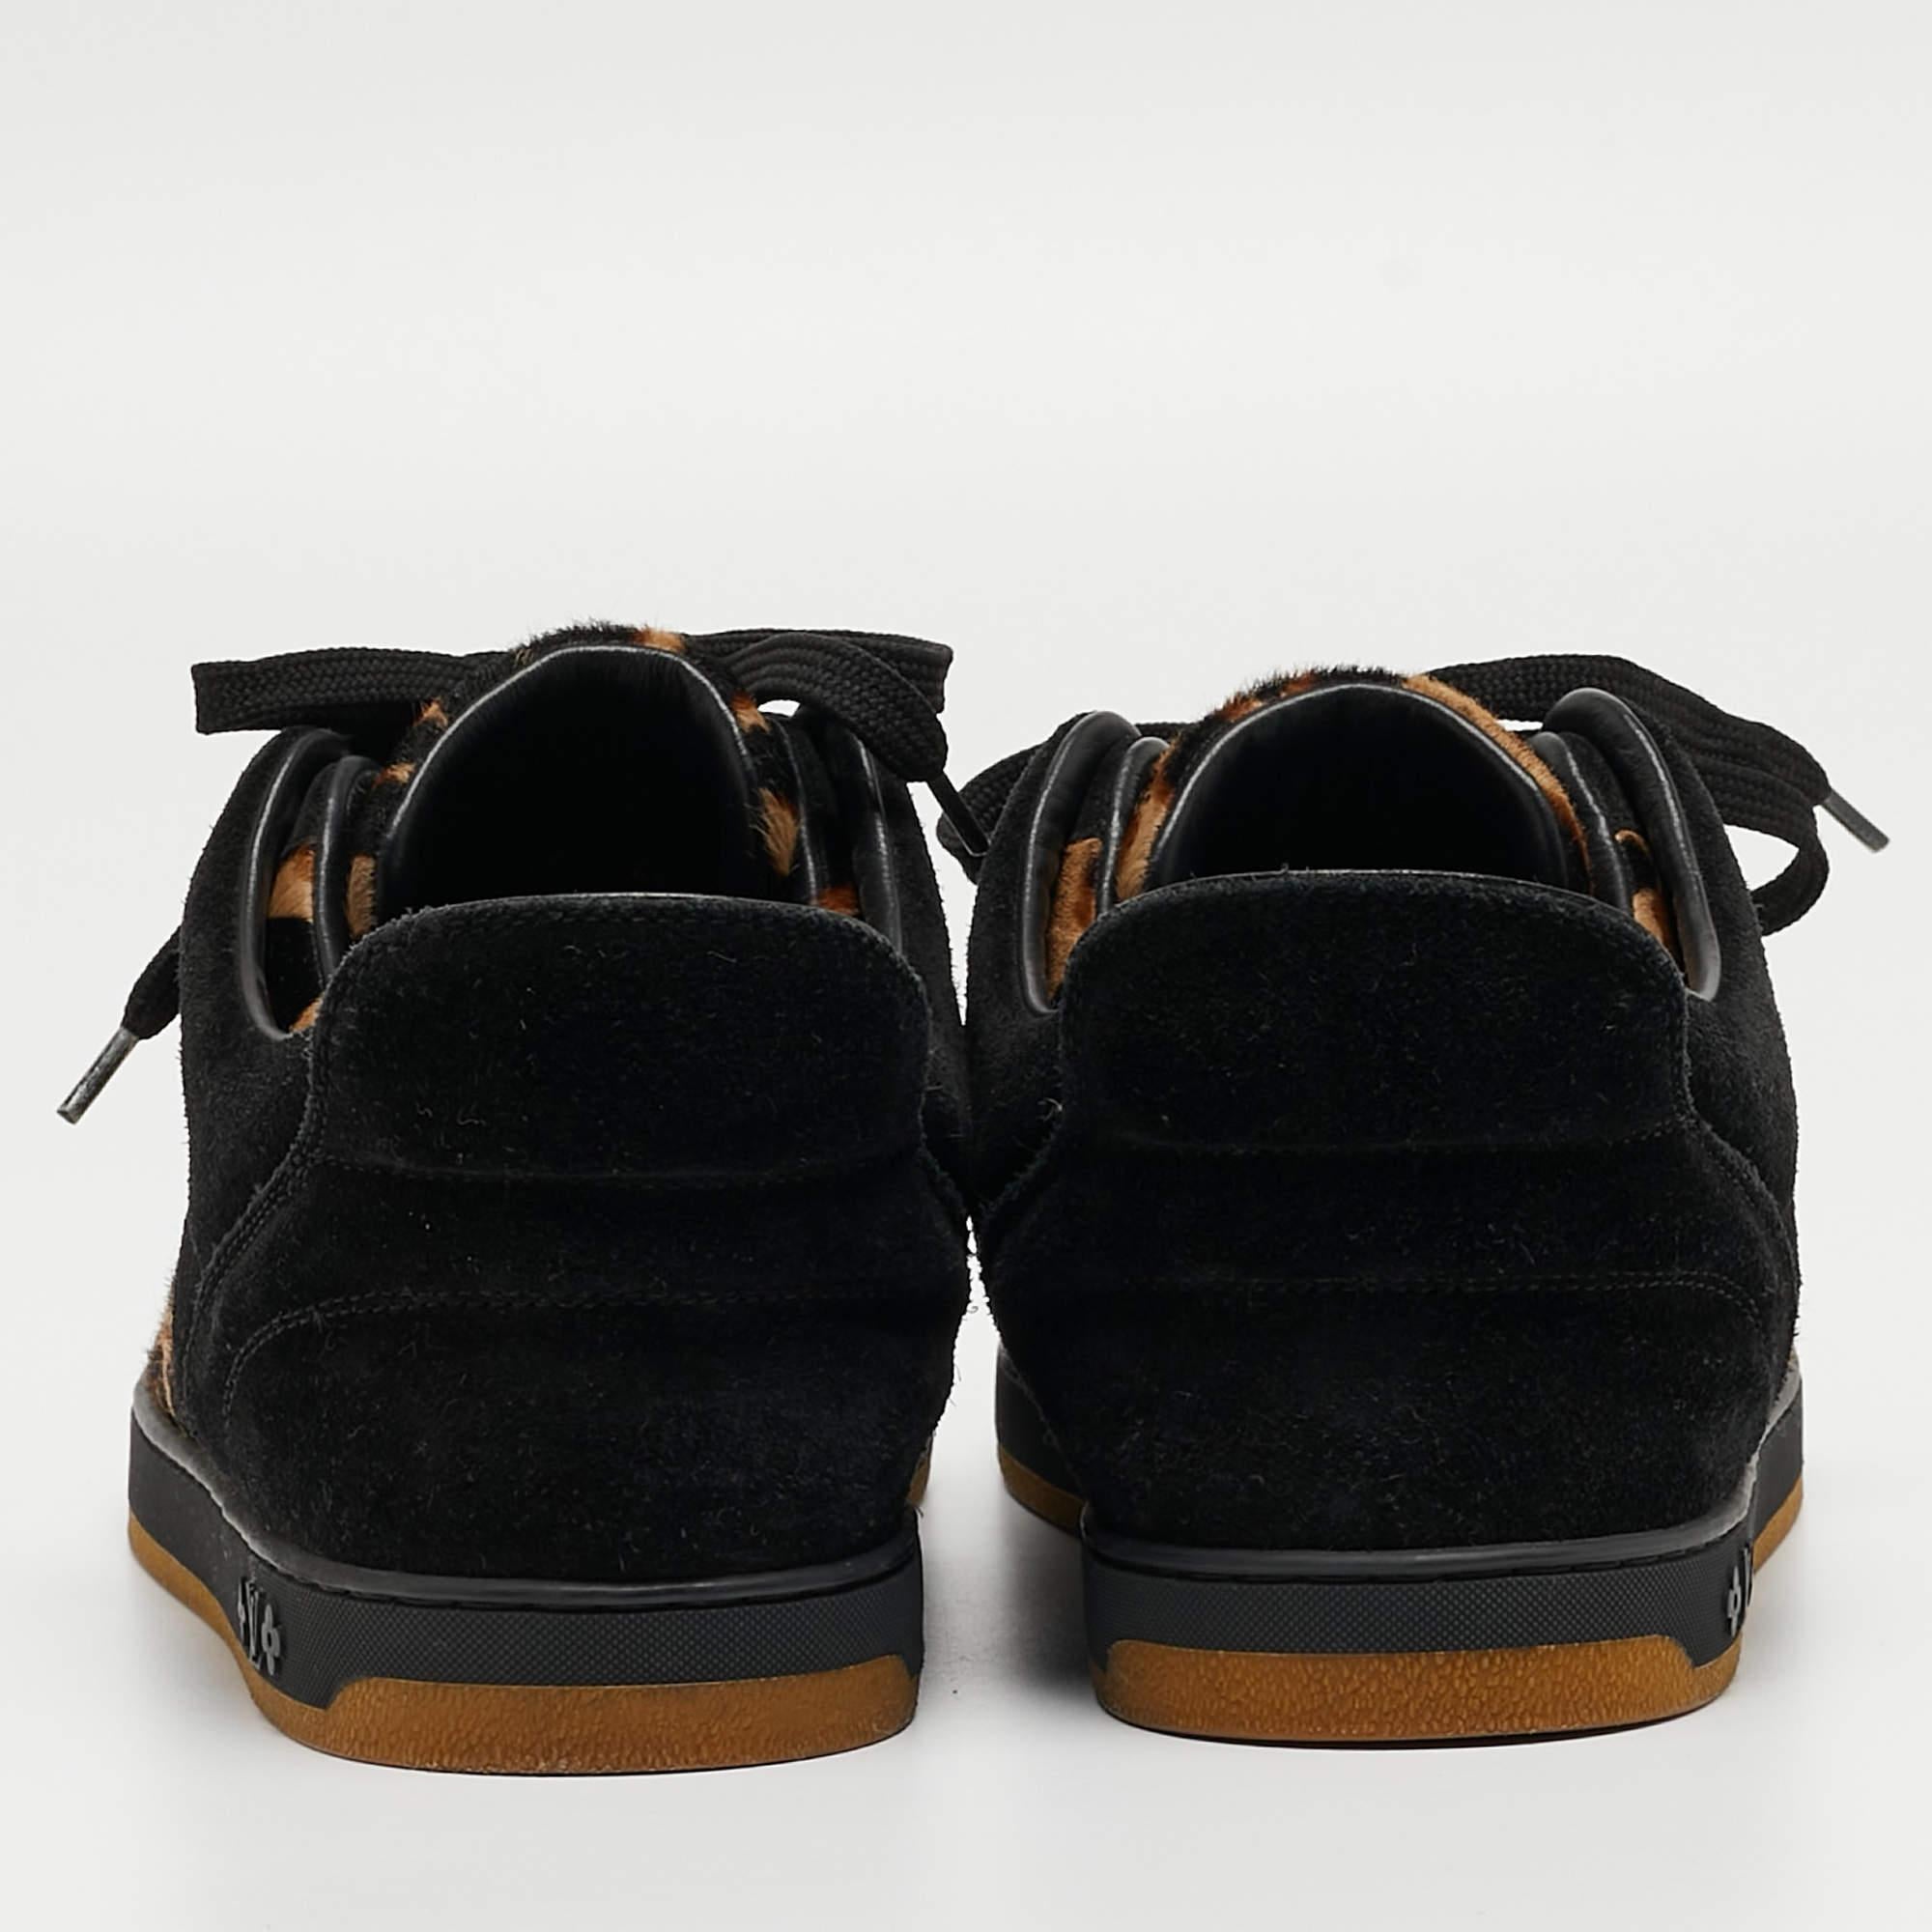 Louis Vuitton Black/Brown Calf Hair and Suede Low Top Sneakers Size 38.5 For Sale 1